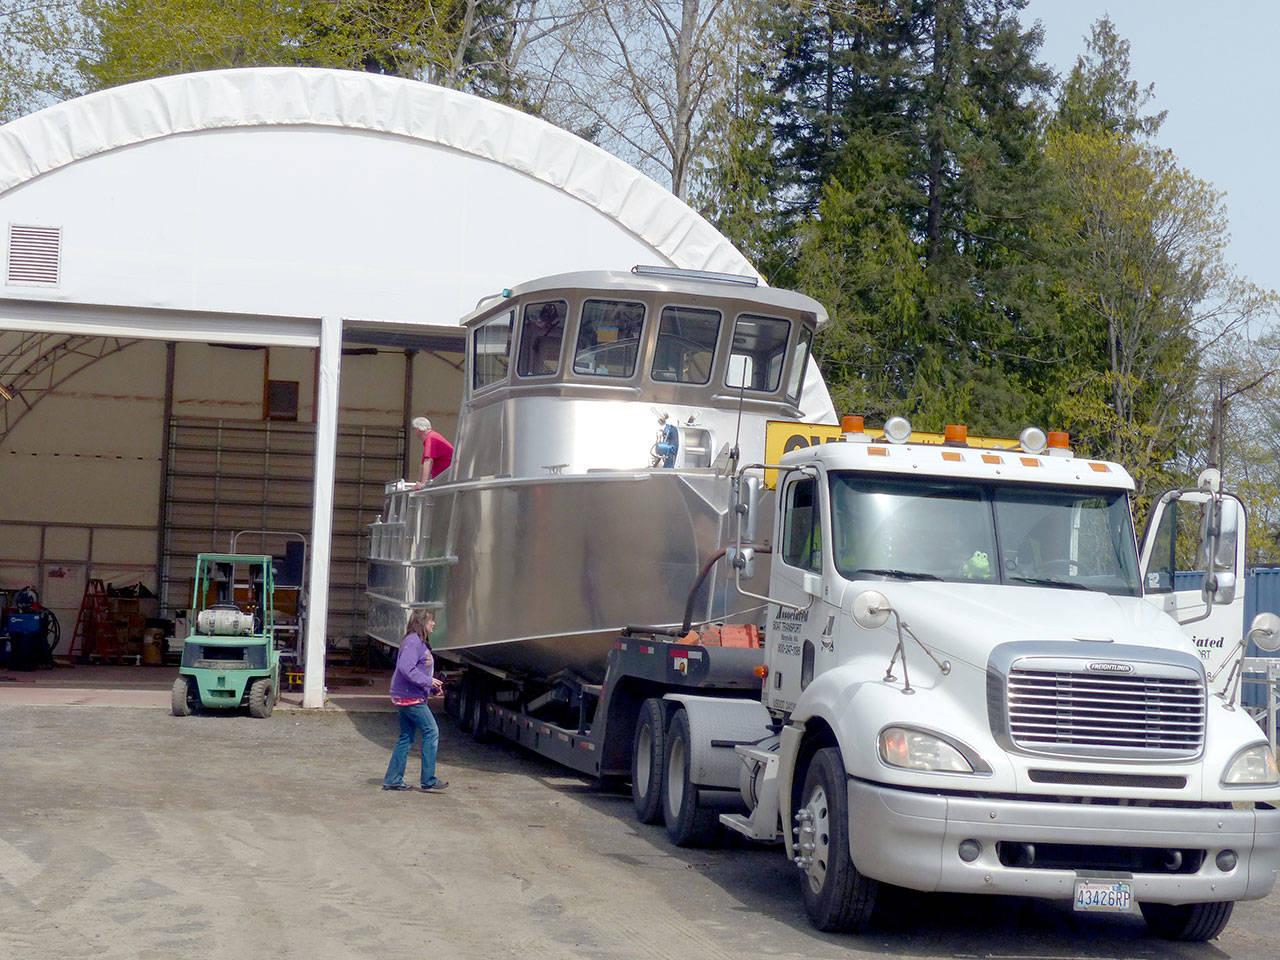 A Bristol Bay boat is loaded on a lowboy trailer for transport to the Port Angeles Boat Yard to be launched. (David G. Sellars/for Peninsula Daily News)